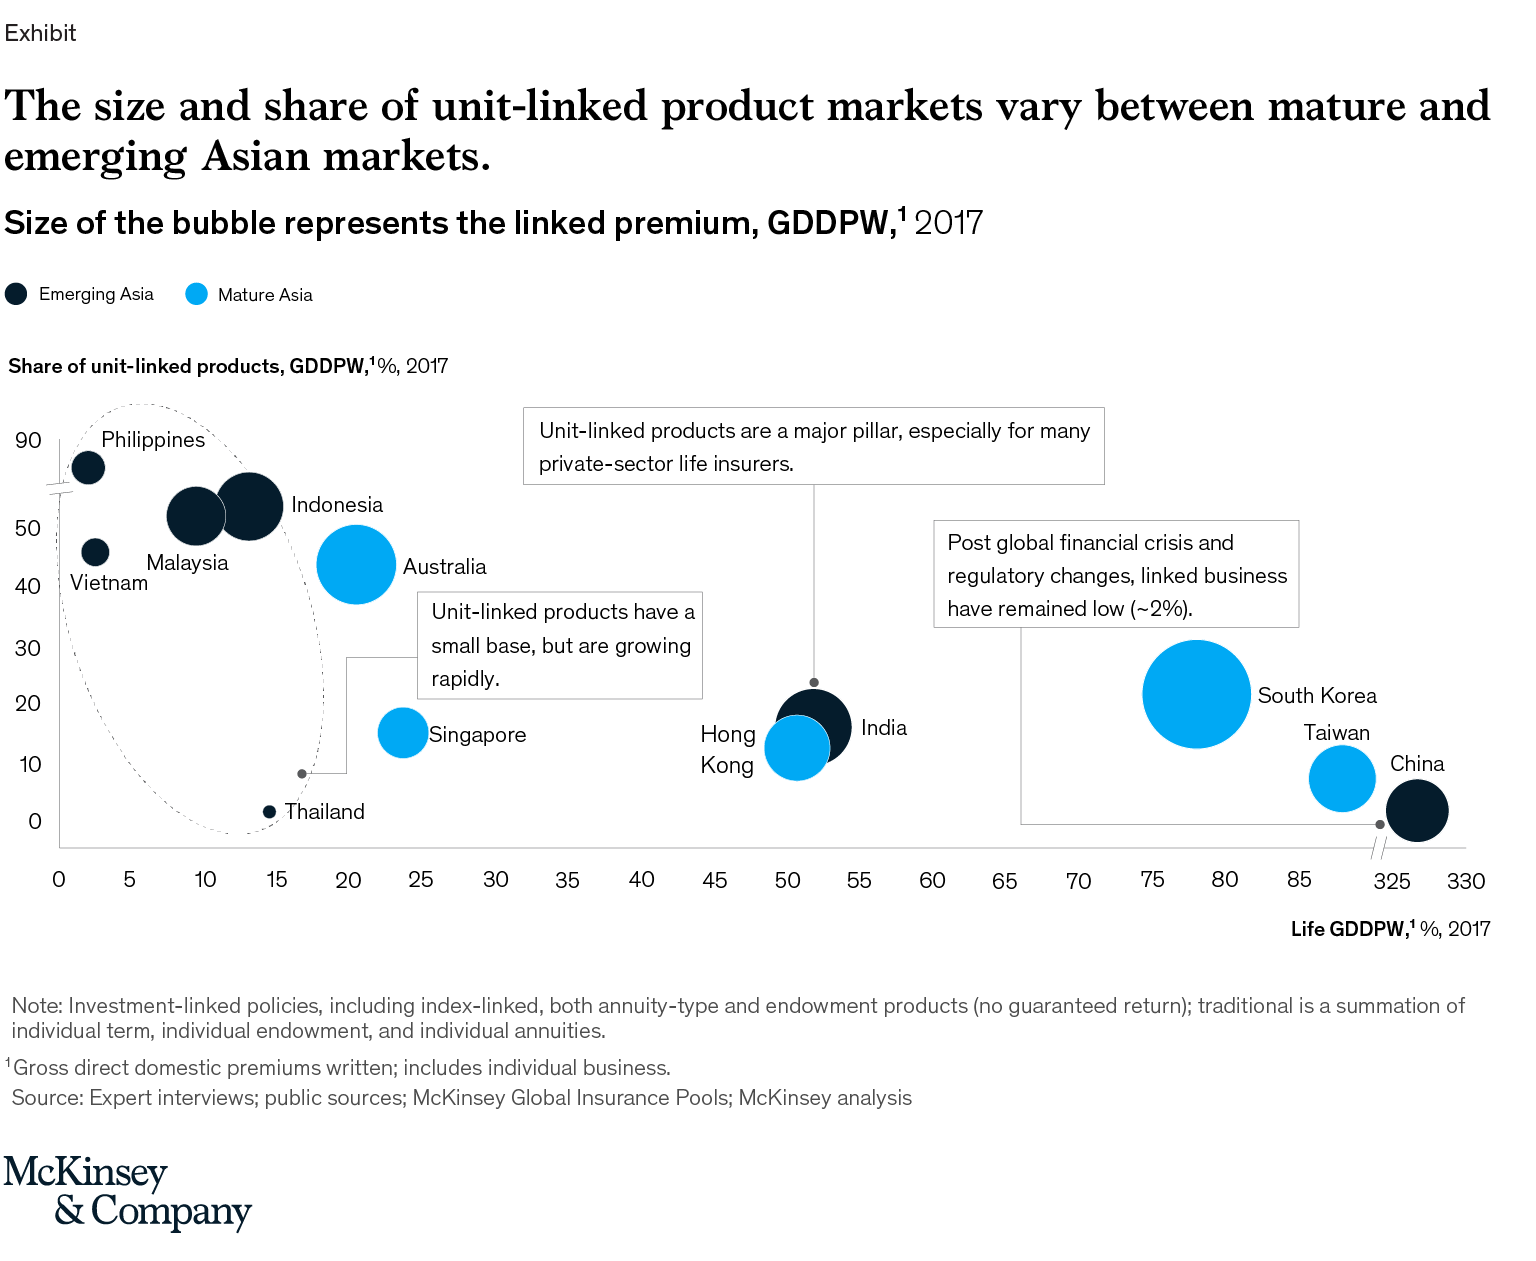 The size and share of unit-linked product markets vary between mature and emerging Asian markets